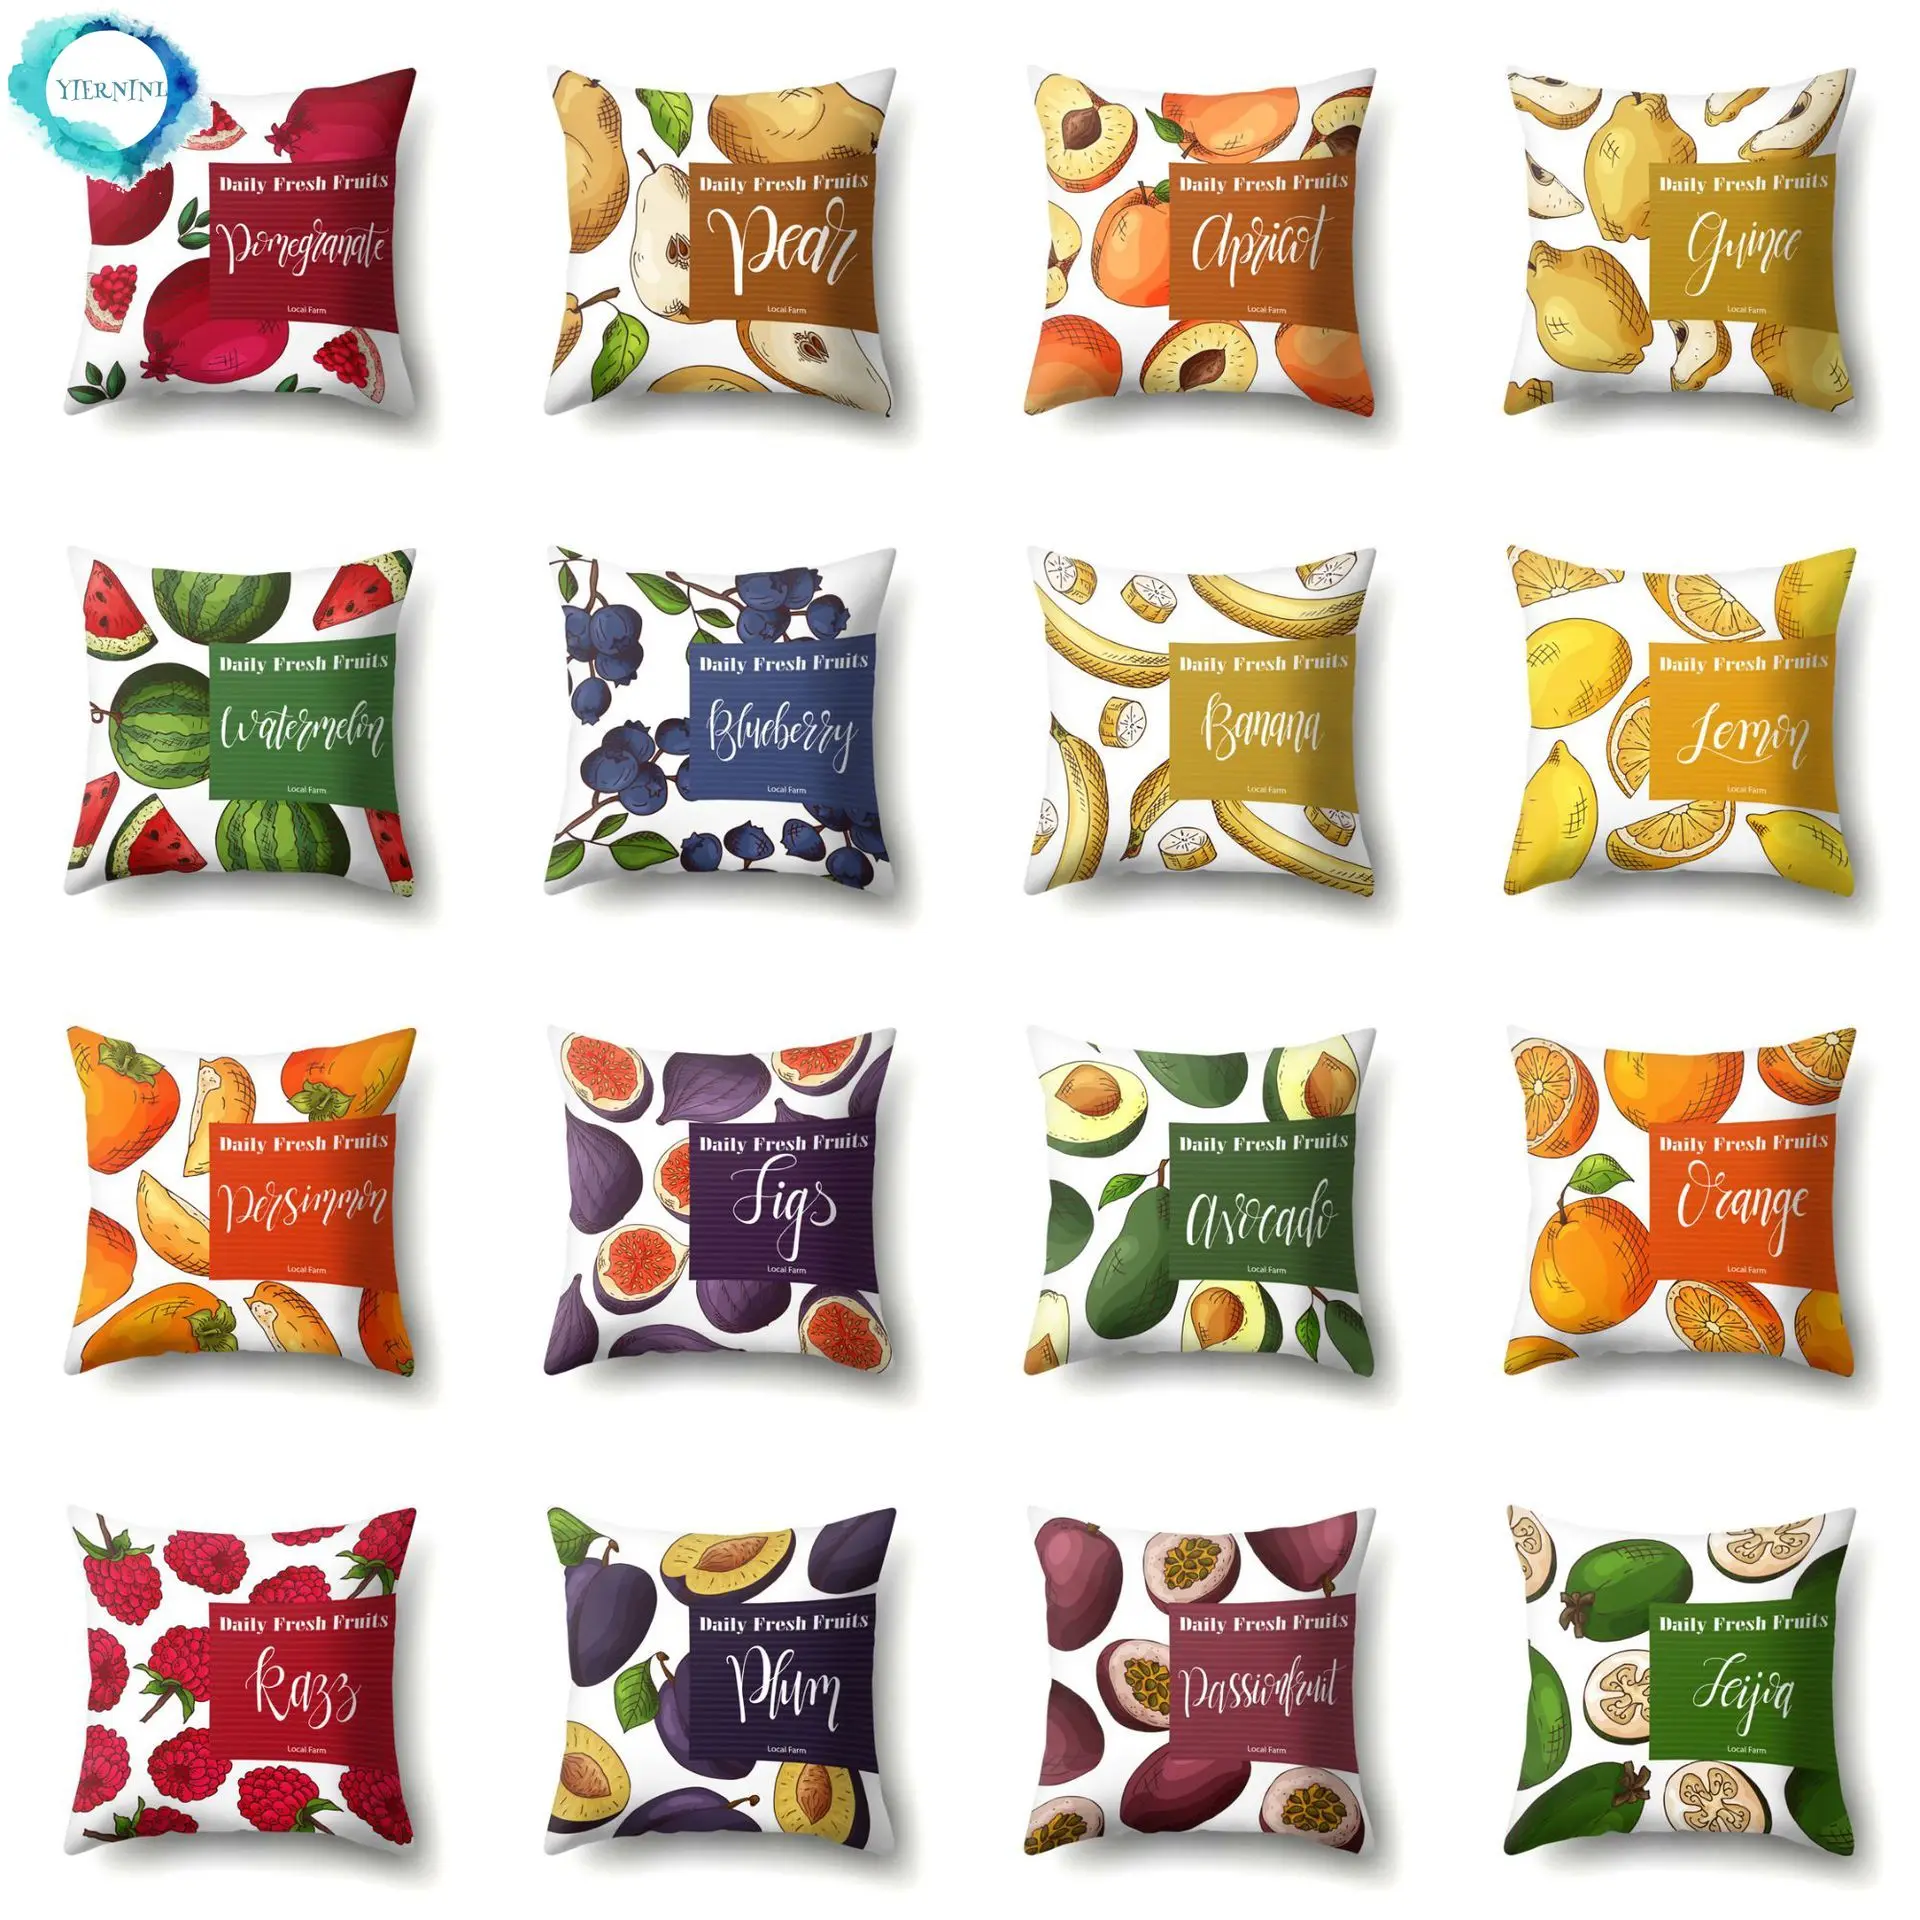 

Fruits Watermelon Polyester Decorative Cushion Cover Summer Fresh Throw Pillow Covers Lemon Banana Pattern for Sofa Living Room